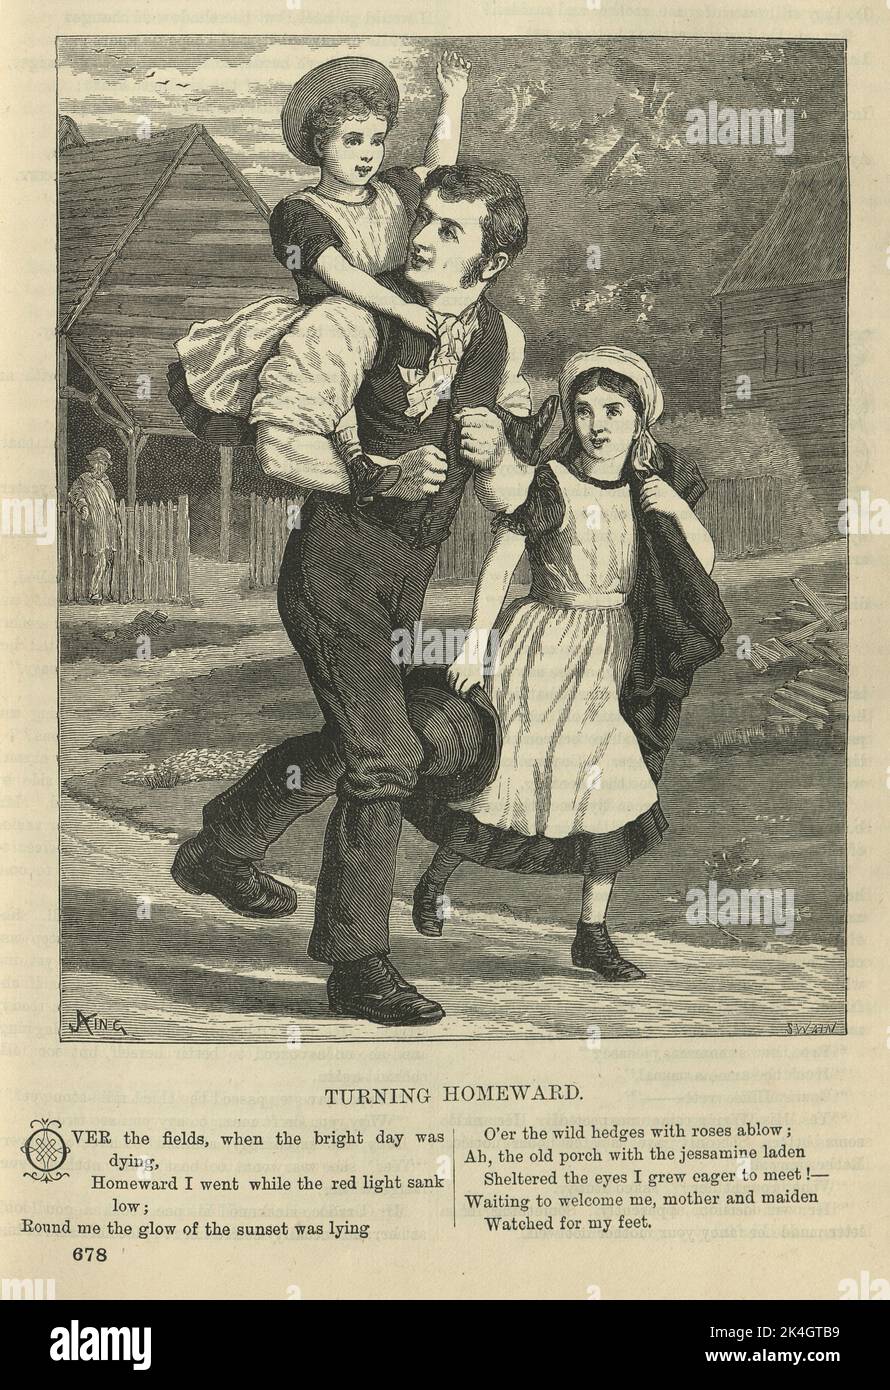 Illustrated Victorian poem, Father walking home with his children, Turning homeward, Poetry, 1870s, 19th Century Stock Photo